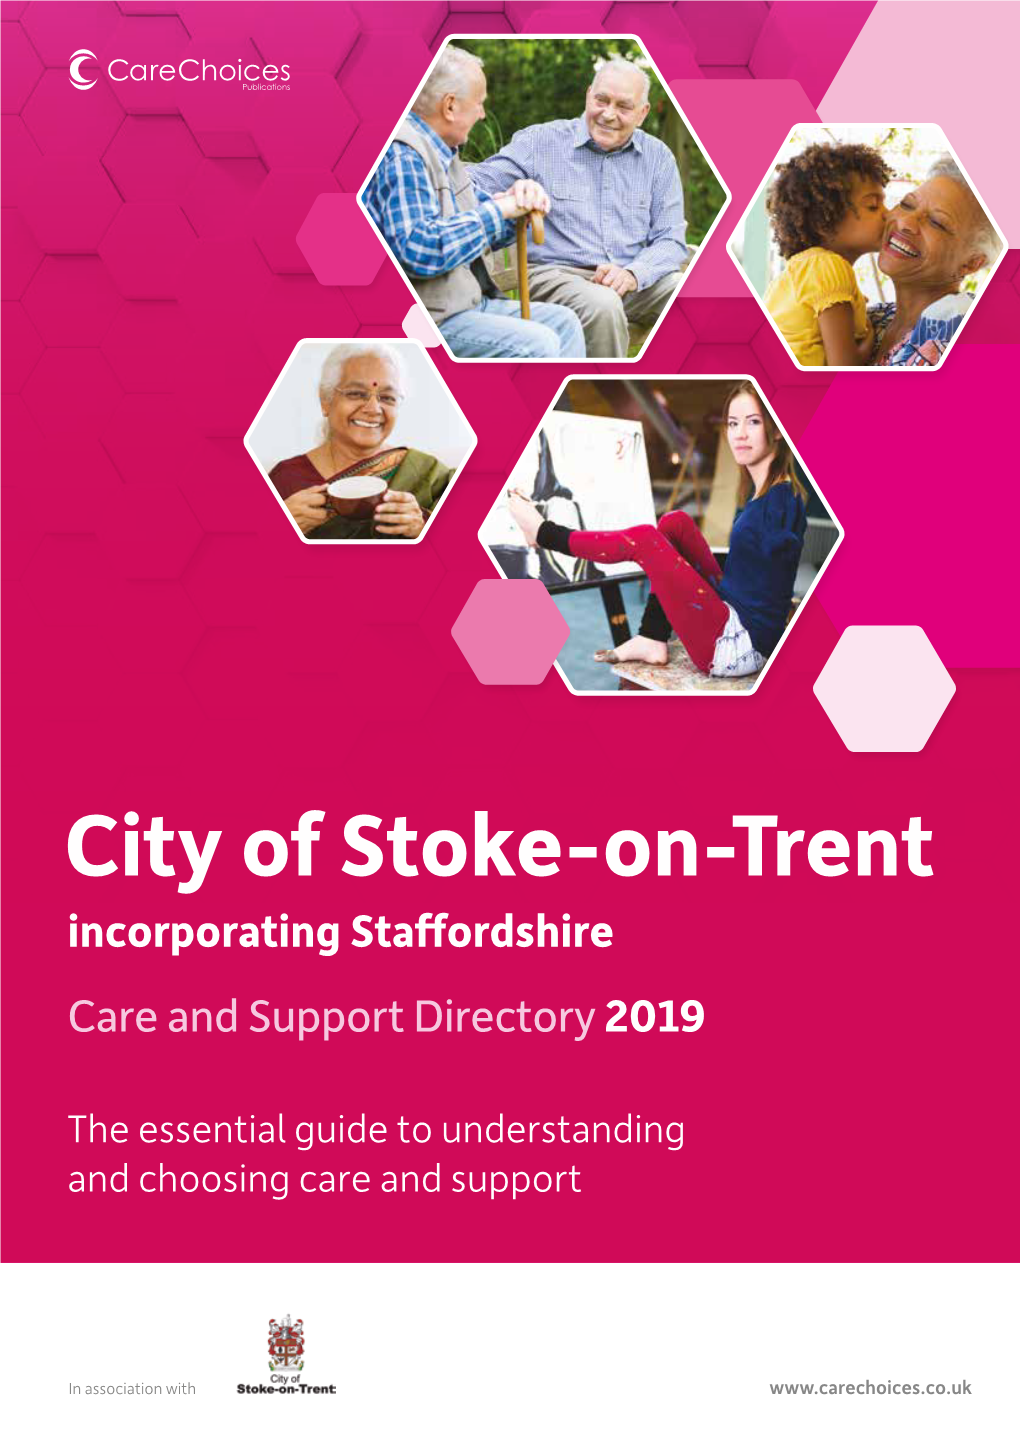 City of Stoke-On-Trent Incorporating Staffordshire Care and Support Directory 2019